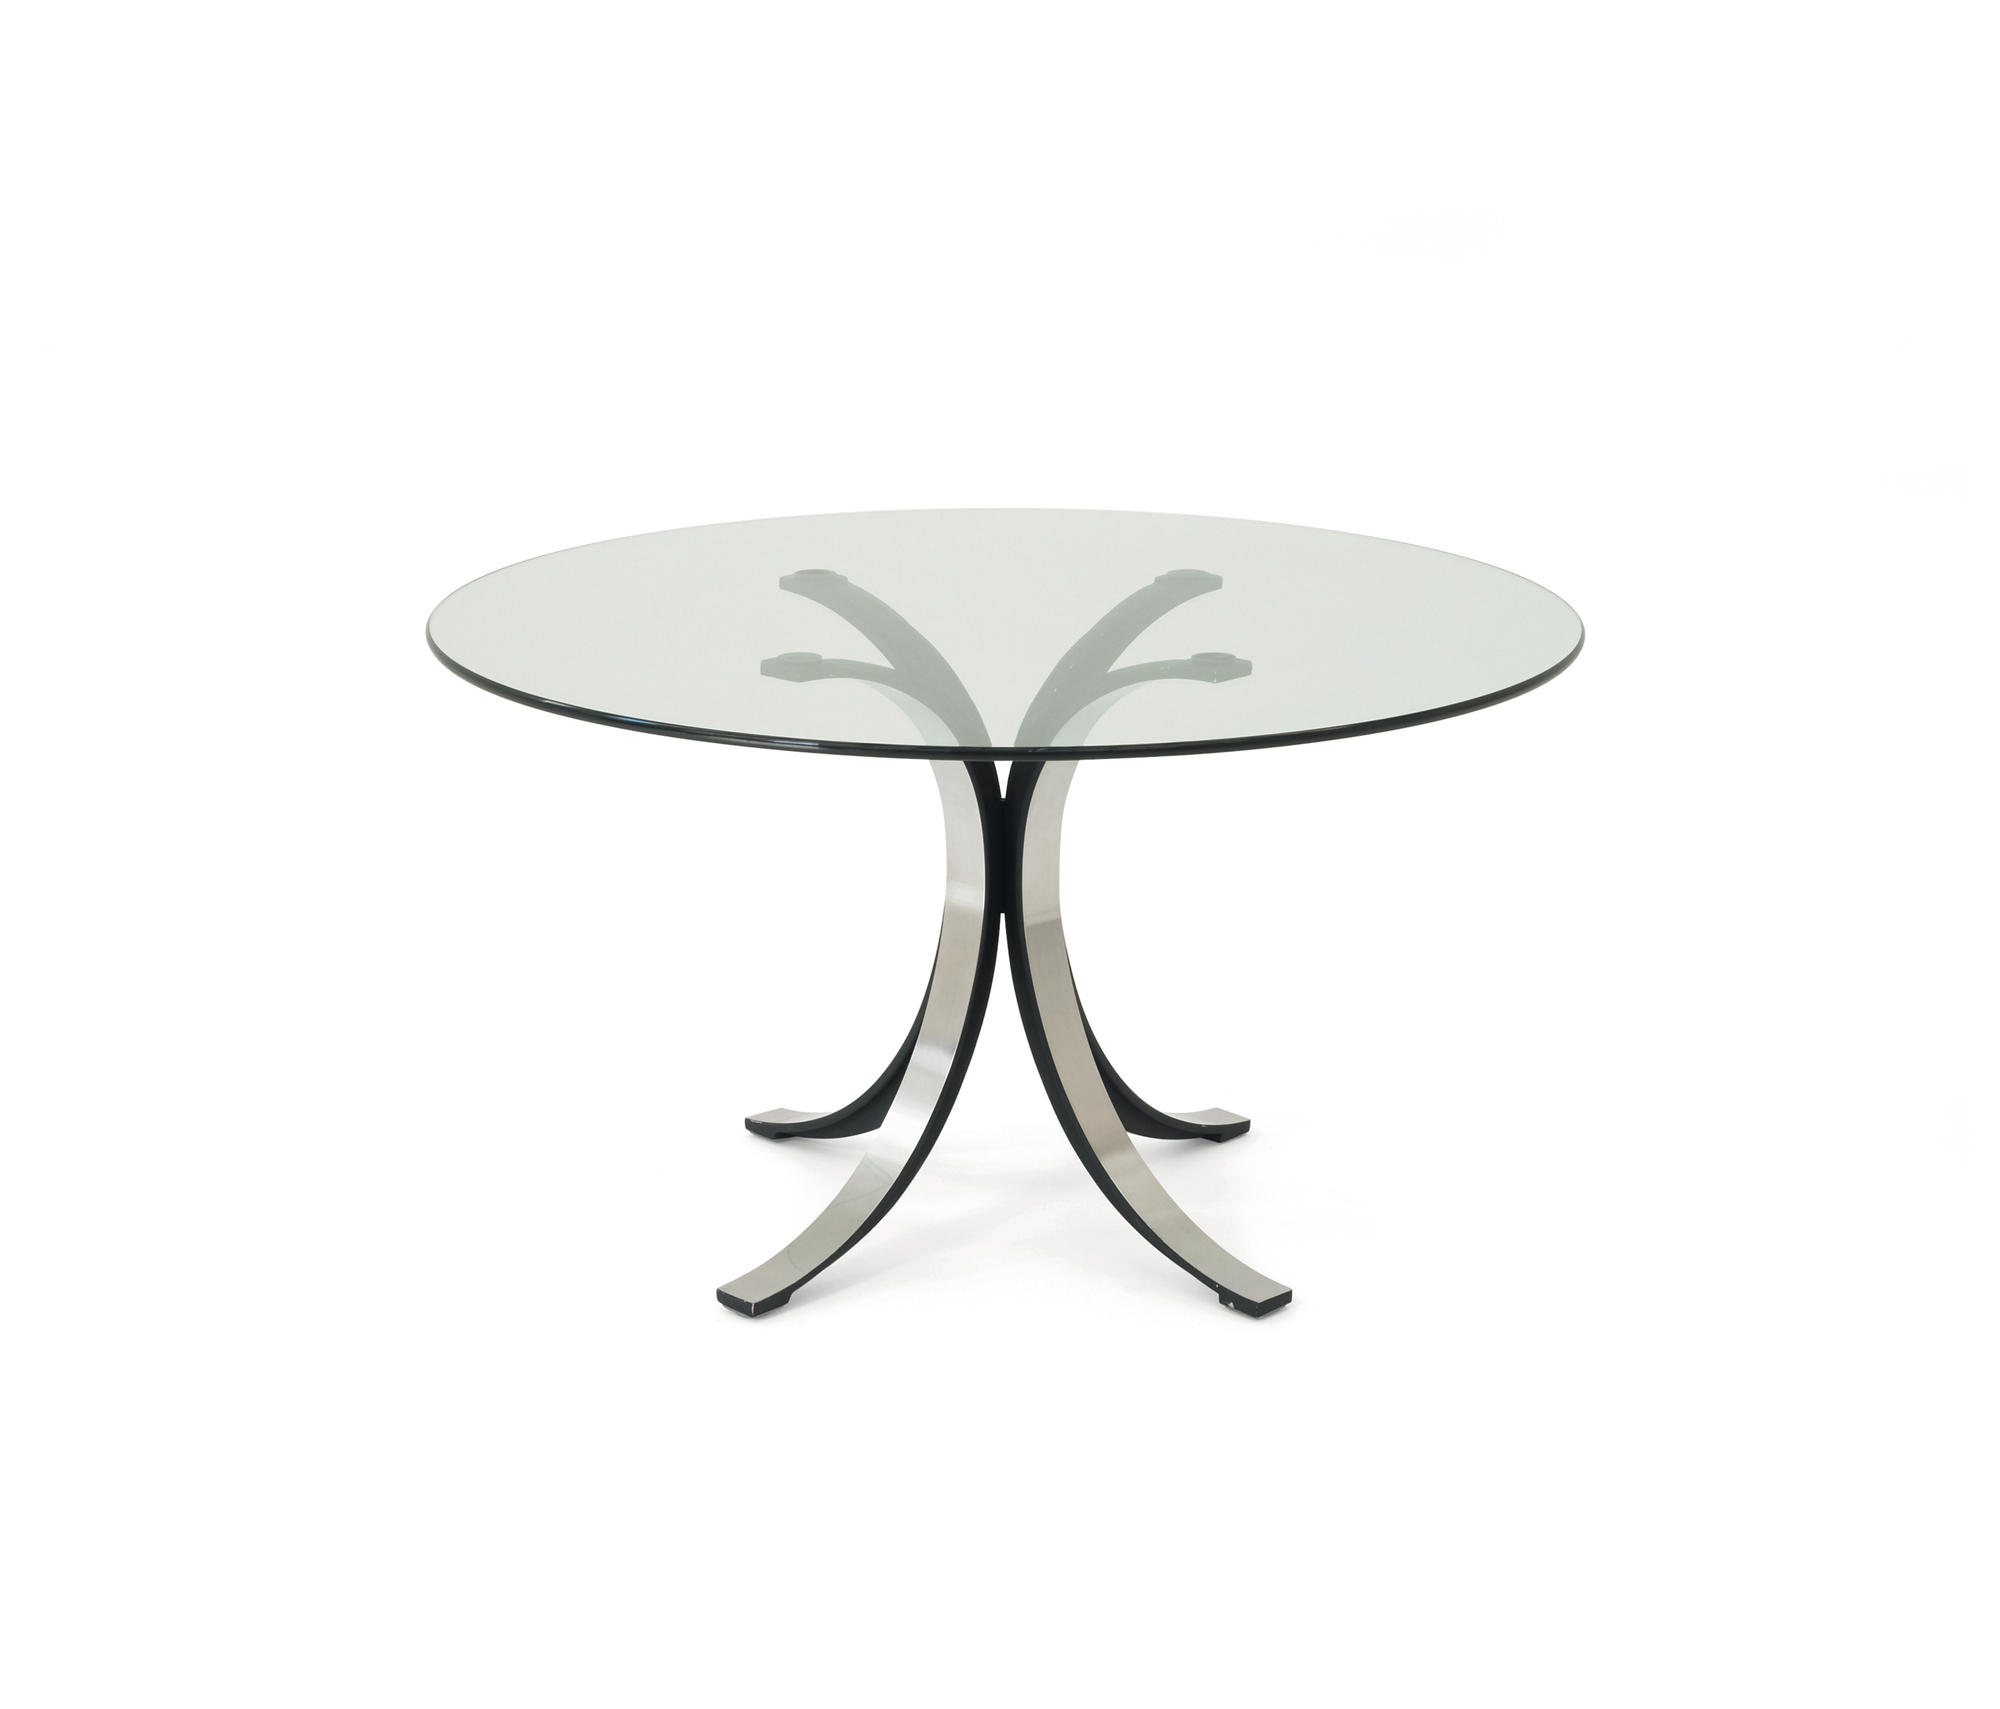 T69 - Dining tables from Tecno | Architonic